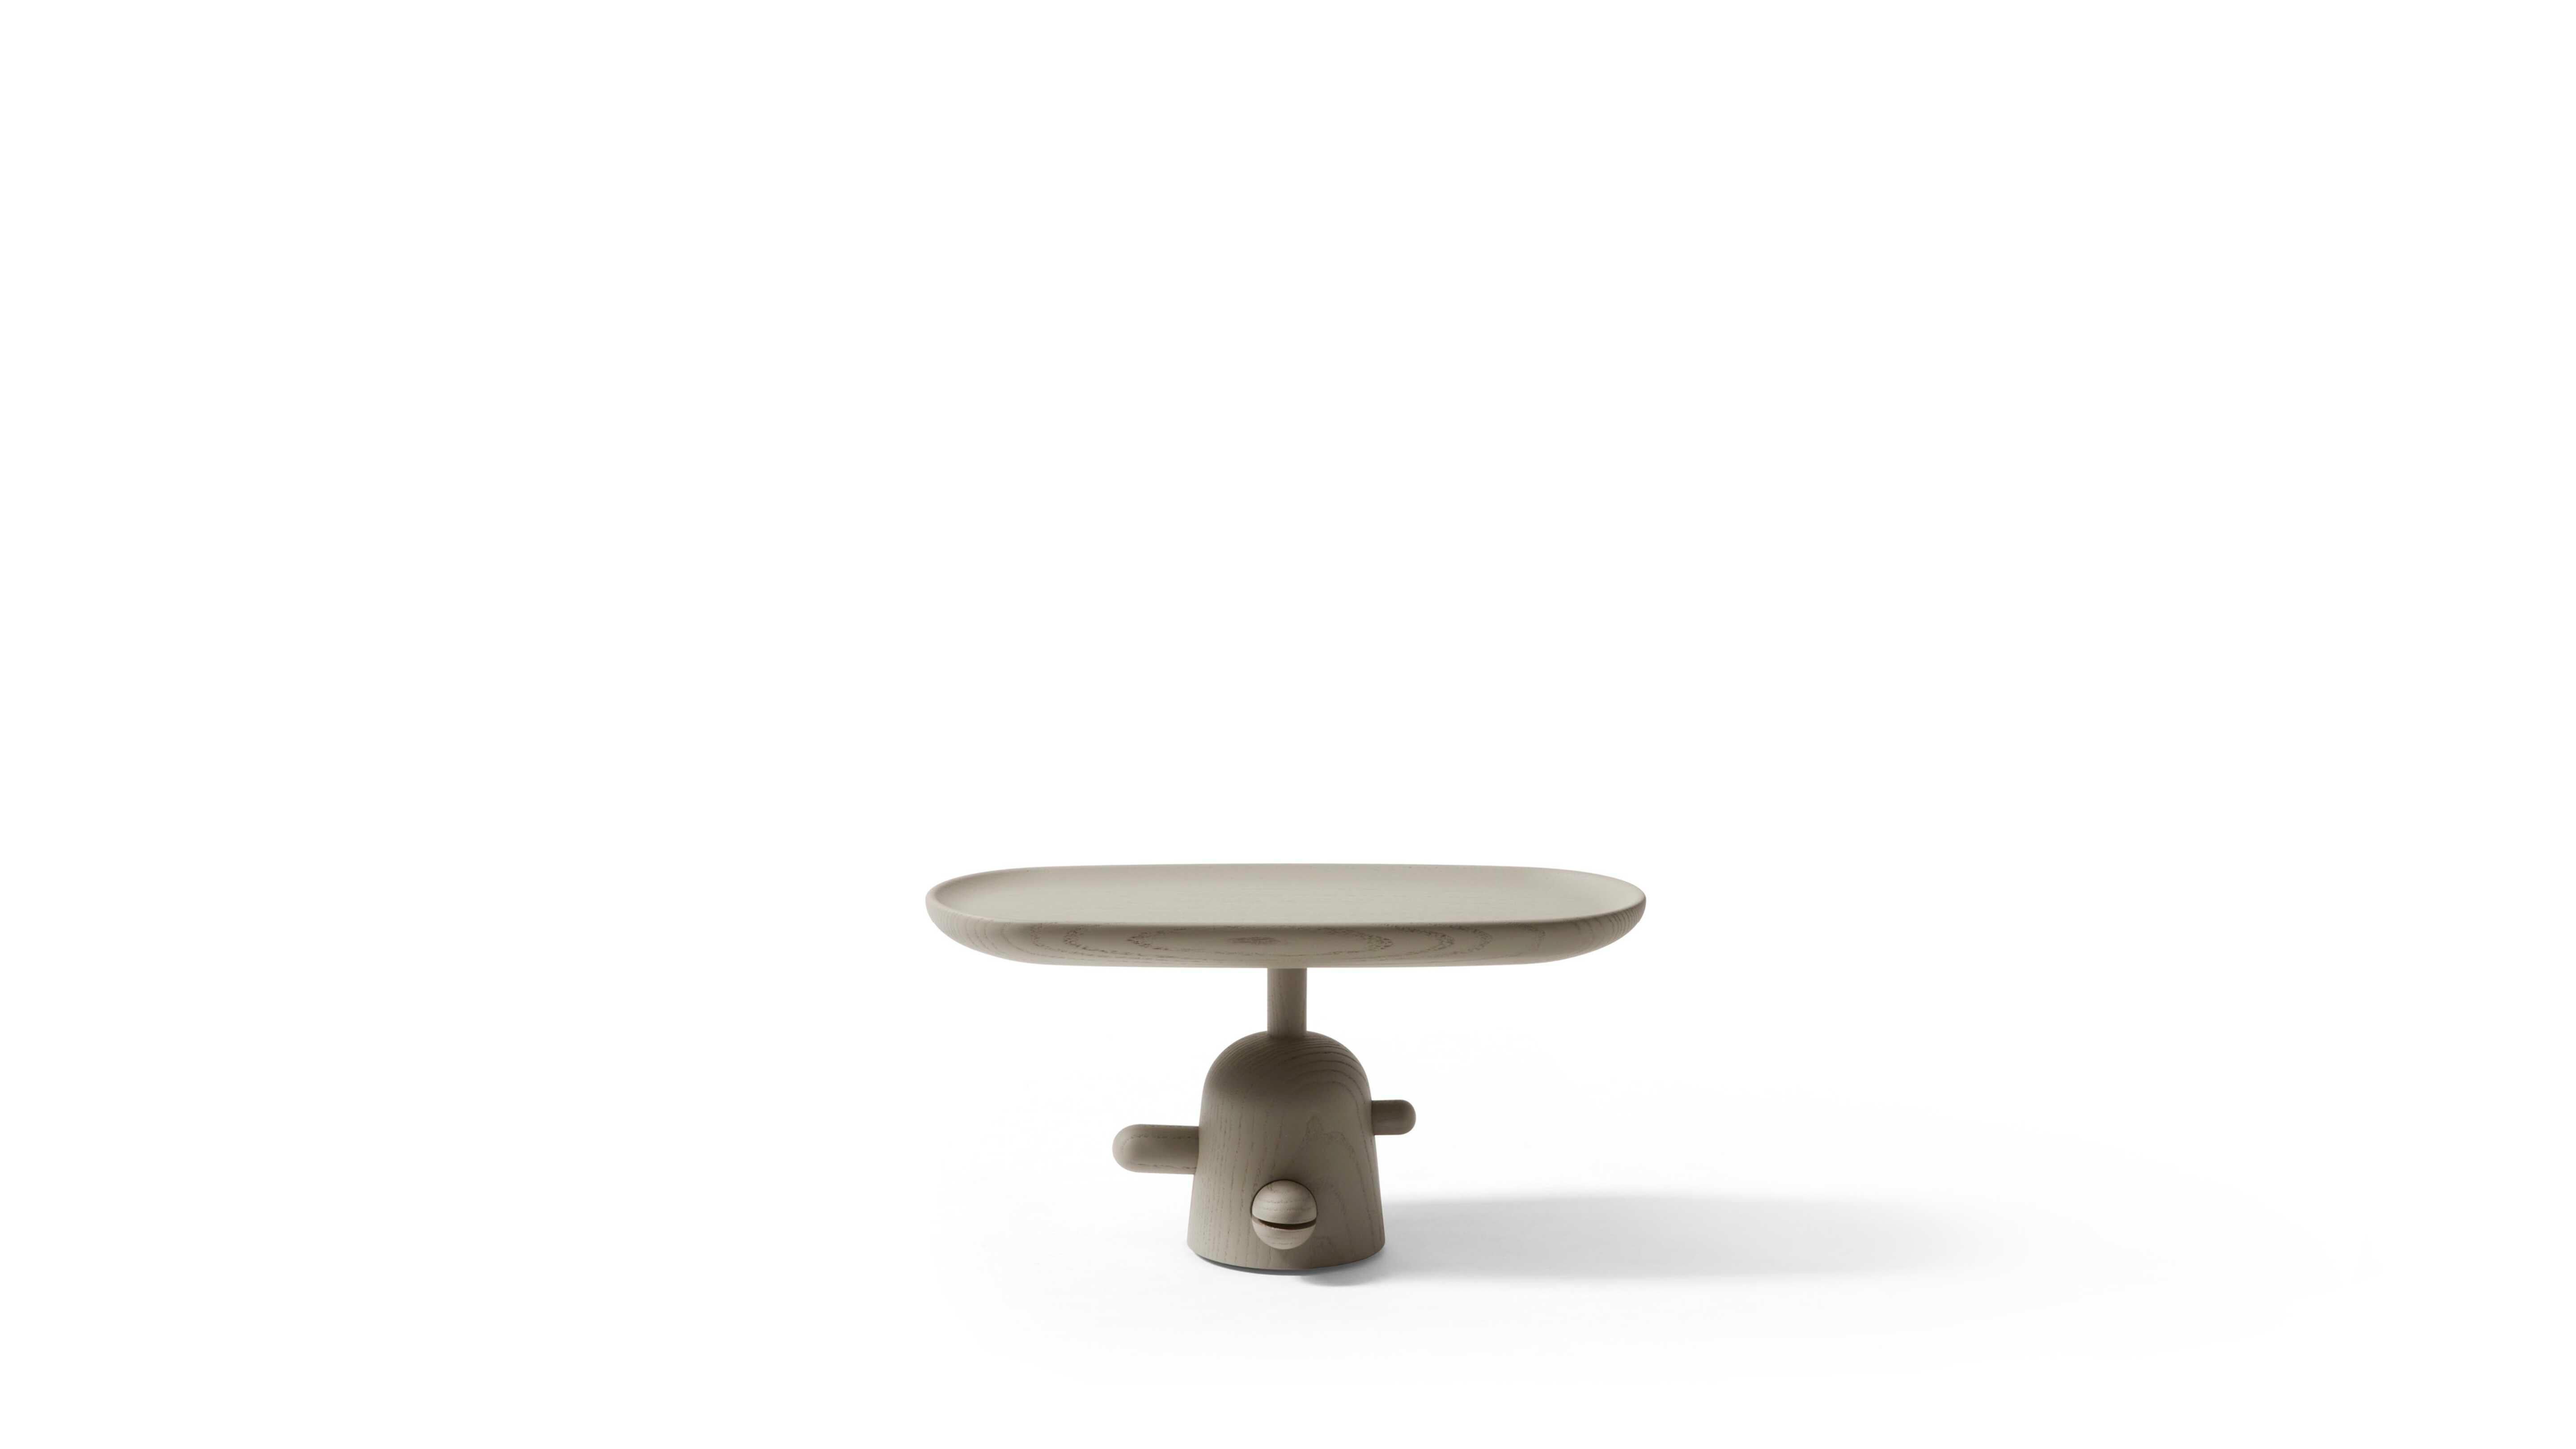 Jaime Hayon Réaction Poétique 1 of 7 decor objects for Cassina, Italy - new  For Sale 6